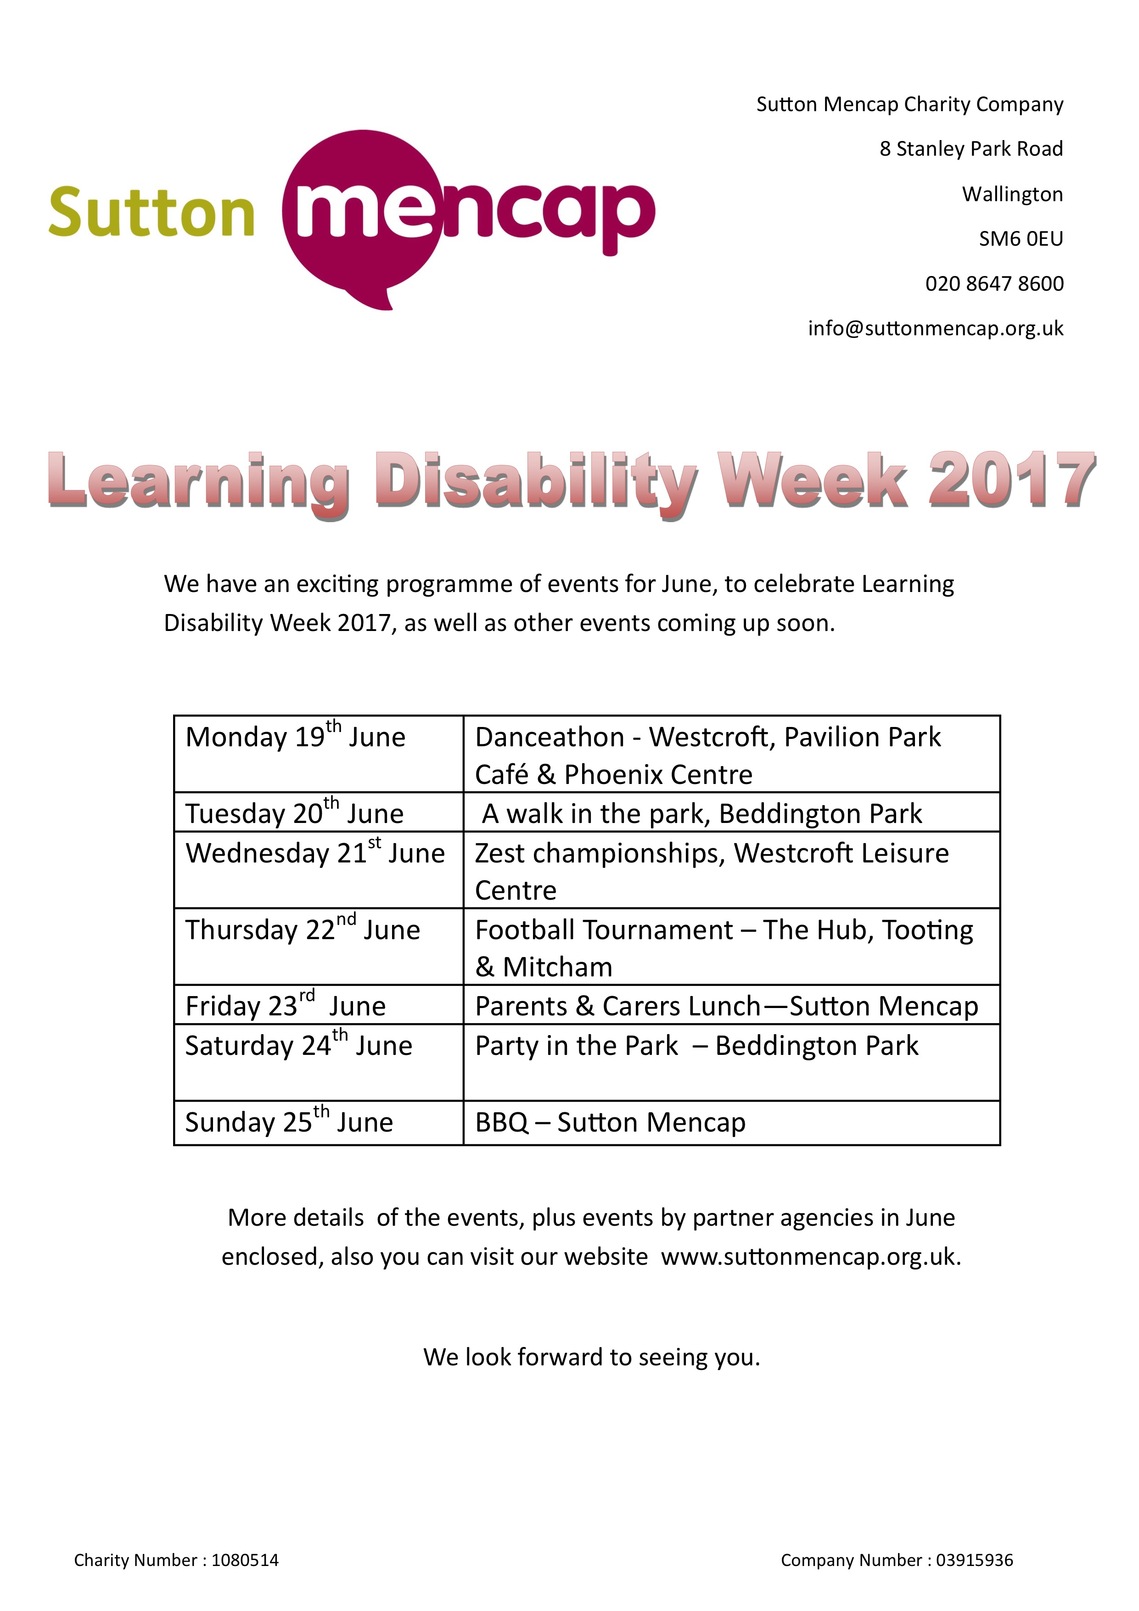 
Learning Disability Week 2017 Programme